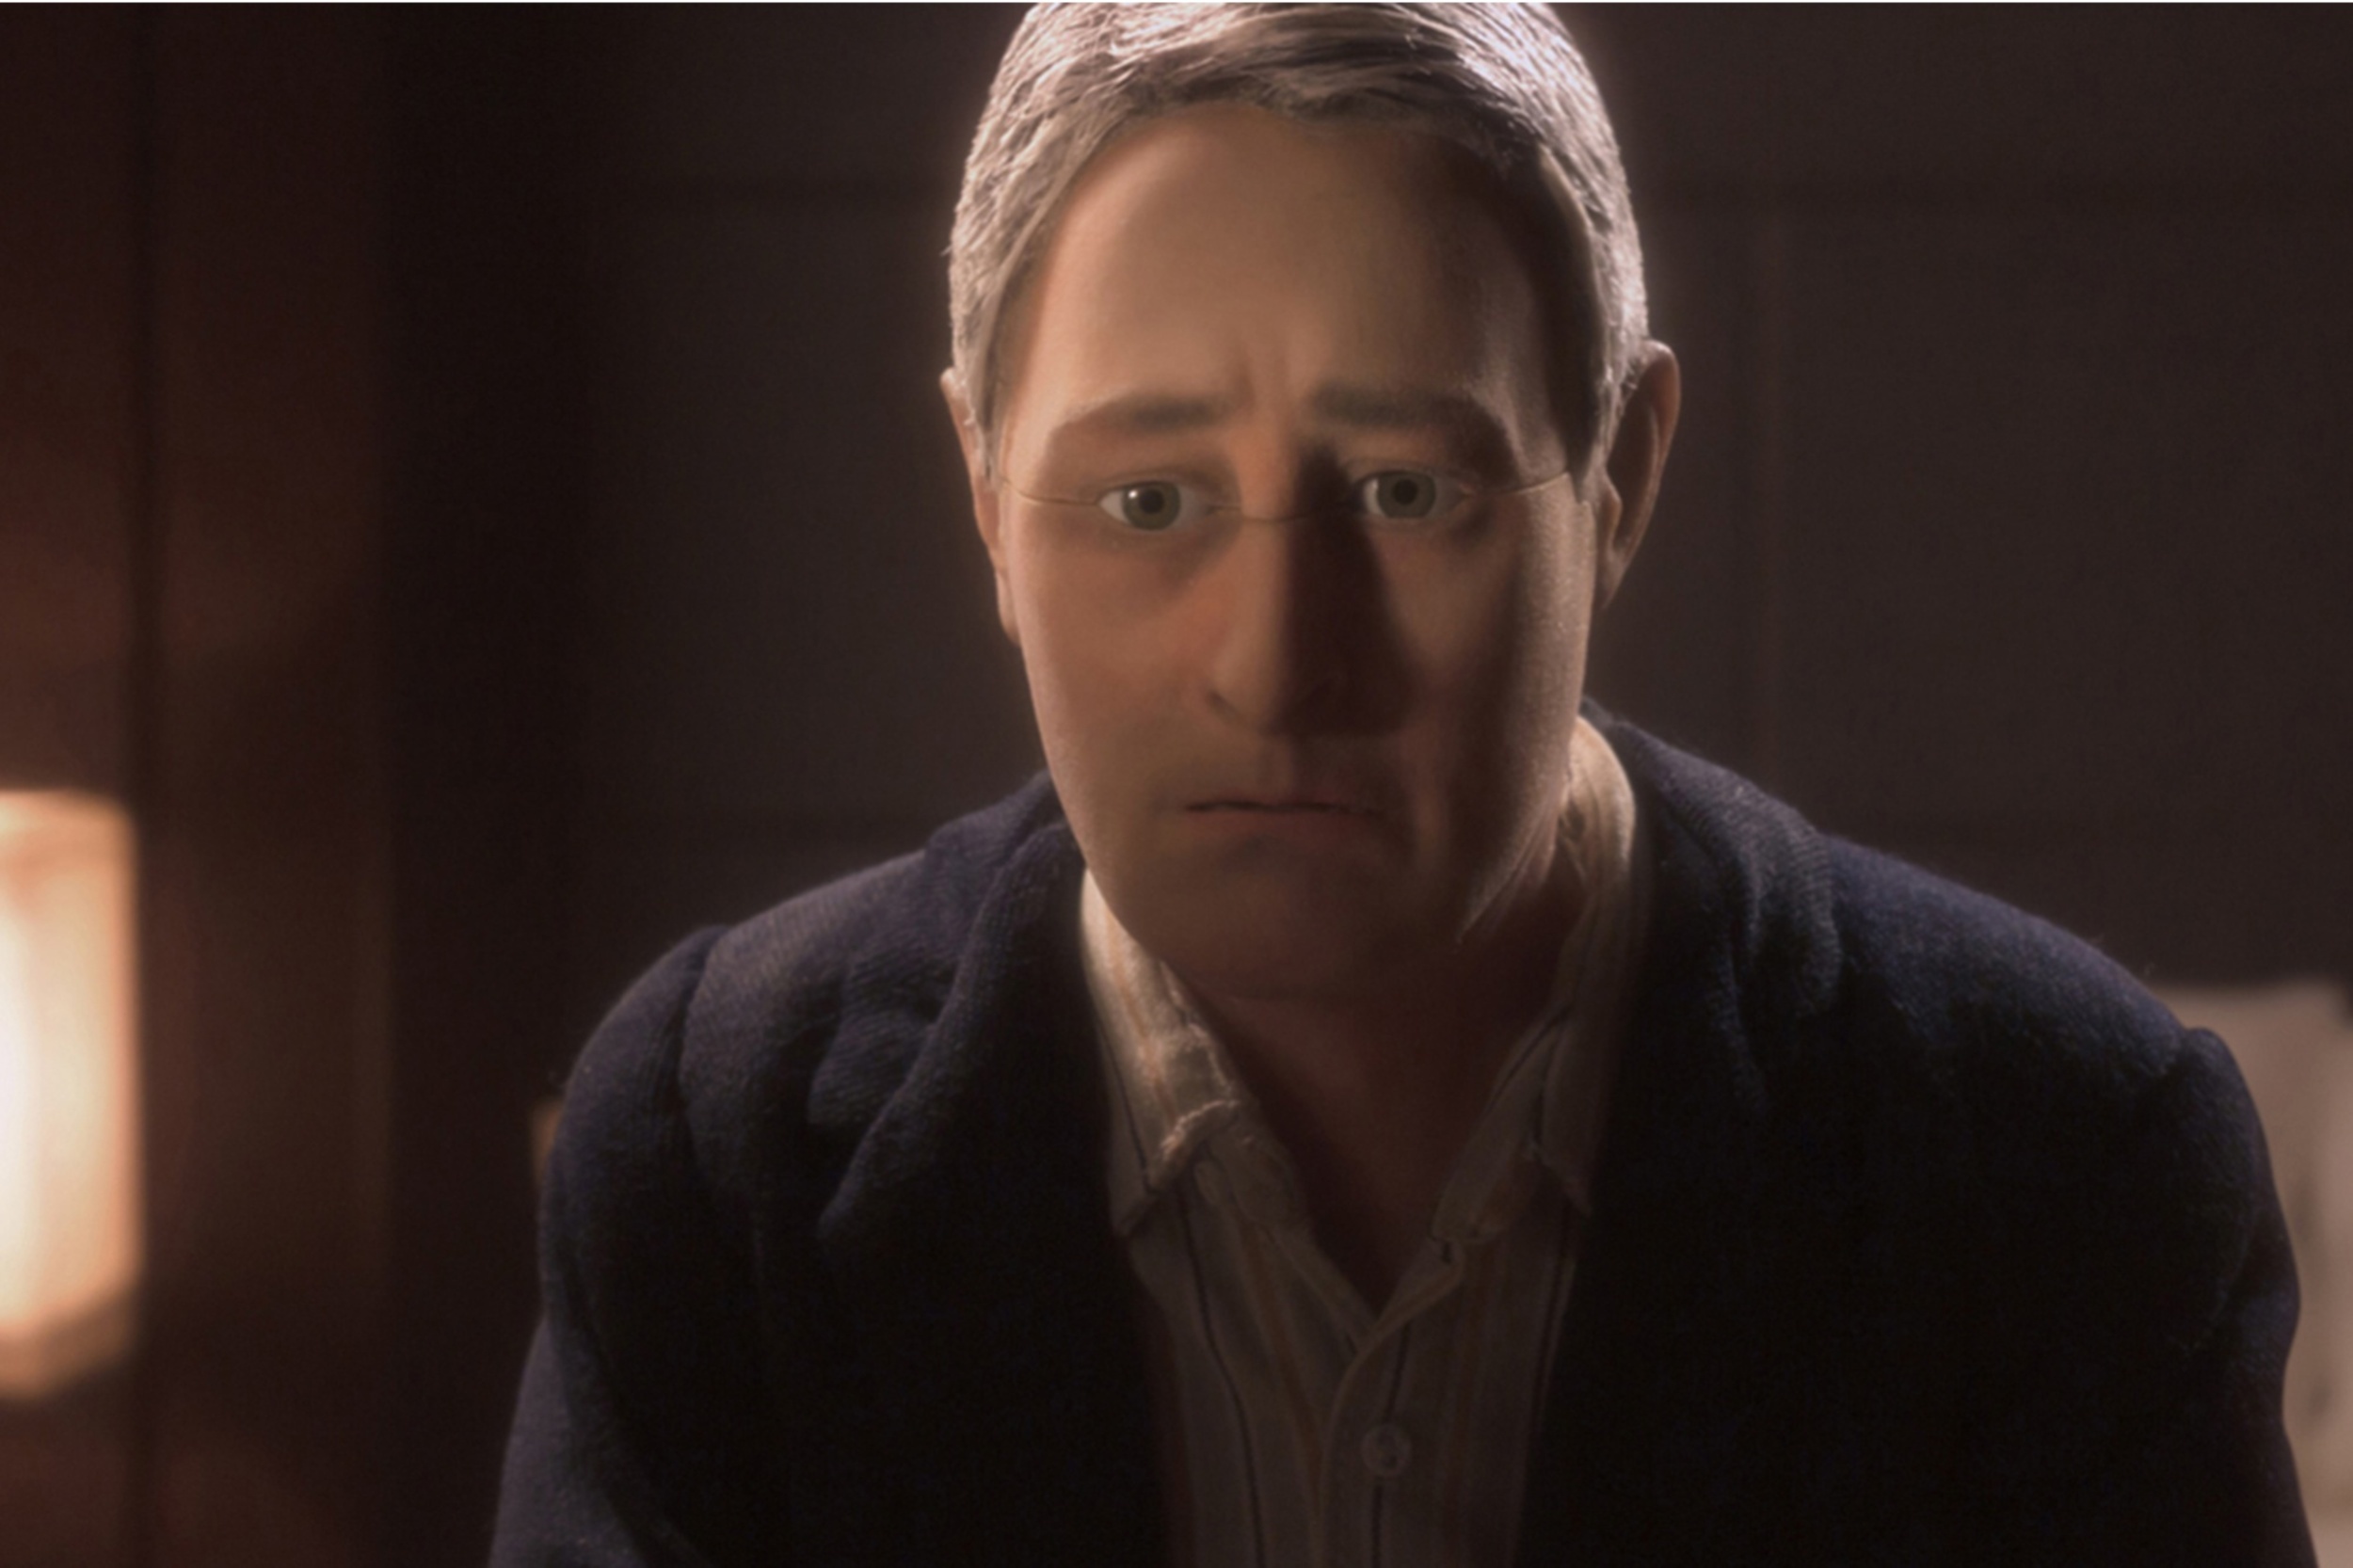 <p>From surrealist director Charlie Kaufman, <em>Anomalisa</em> is an introspective and profound stop-motion animation for grown-ups. Michael, a man tired of his mundane life, meets a lively woman who changes his perspective. The film examines the monotony of existence and how a deep connection with another person can change our lives. While <em>Anomalisa</em> is animated, this is certainly not for kids, as it features sex, profanity, and other adult themes. </p><p><a href='https://www.msn.com/en-us/community/channel/vid-cj9pqbr0vn9in2b6ddcd8sfgpfq6x6utp44fssrv6mc2gtybw0us'>Follow us on MSN to see more of our exclusive entertainment content.</a></p>